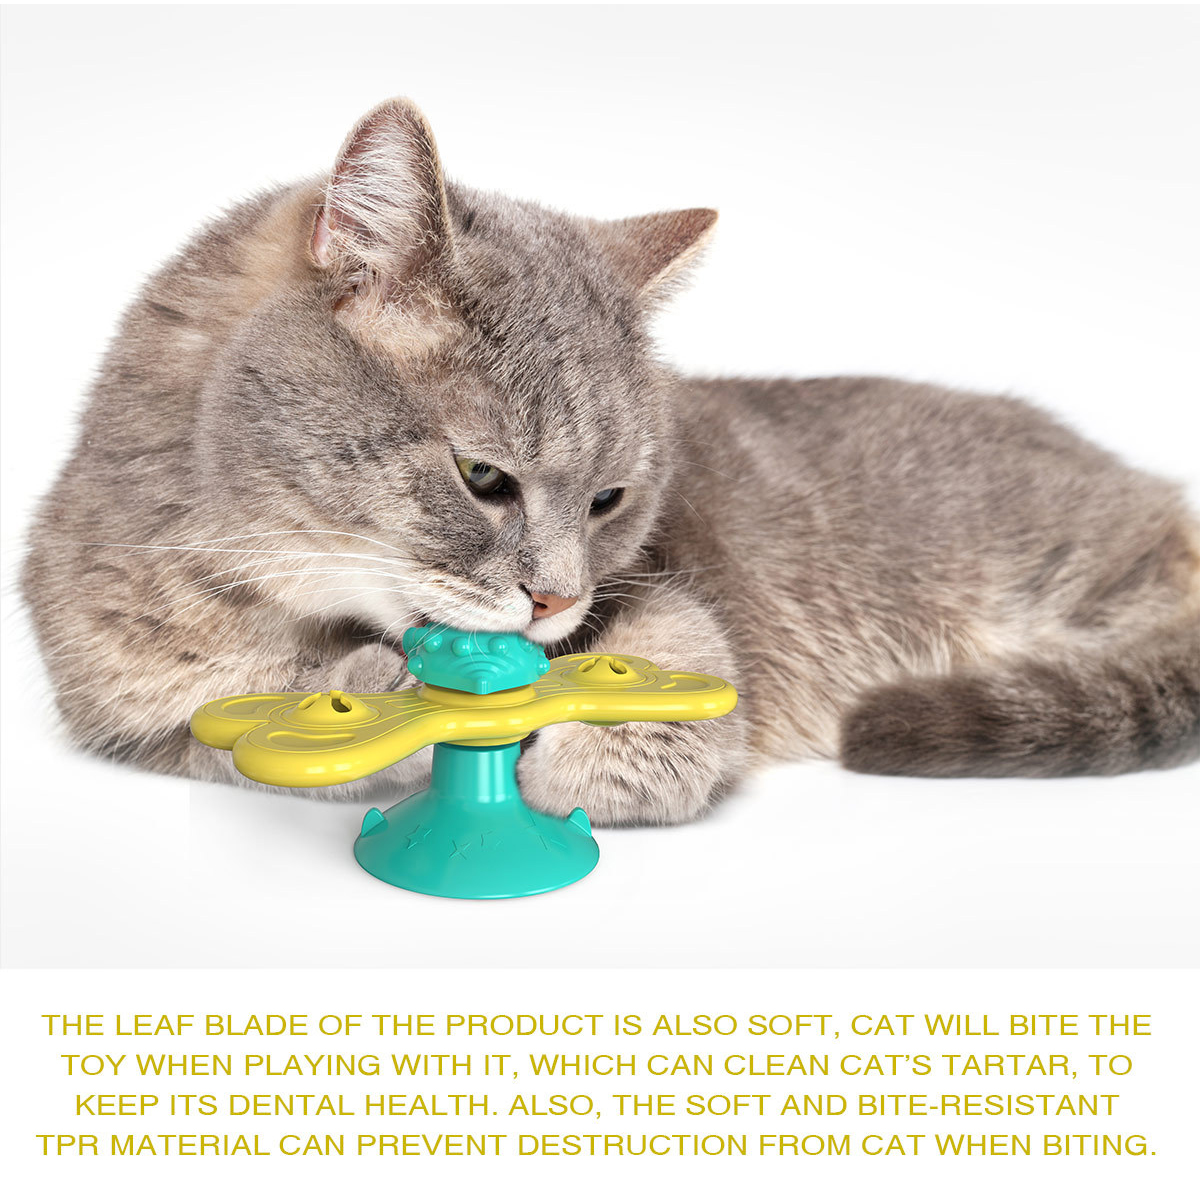 Windmill-Cat-Toy-Funny-Turntable-Teasing-Pet-Toy-Scratching-Tickle-Cats-Hair-Brush-Cat-Toys-Interact-1791497-9